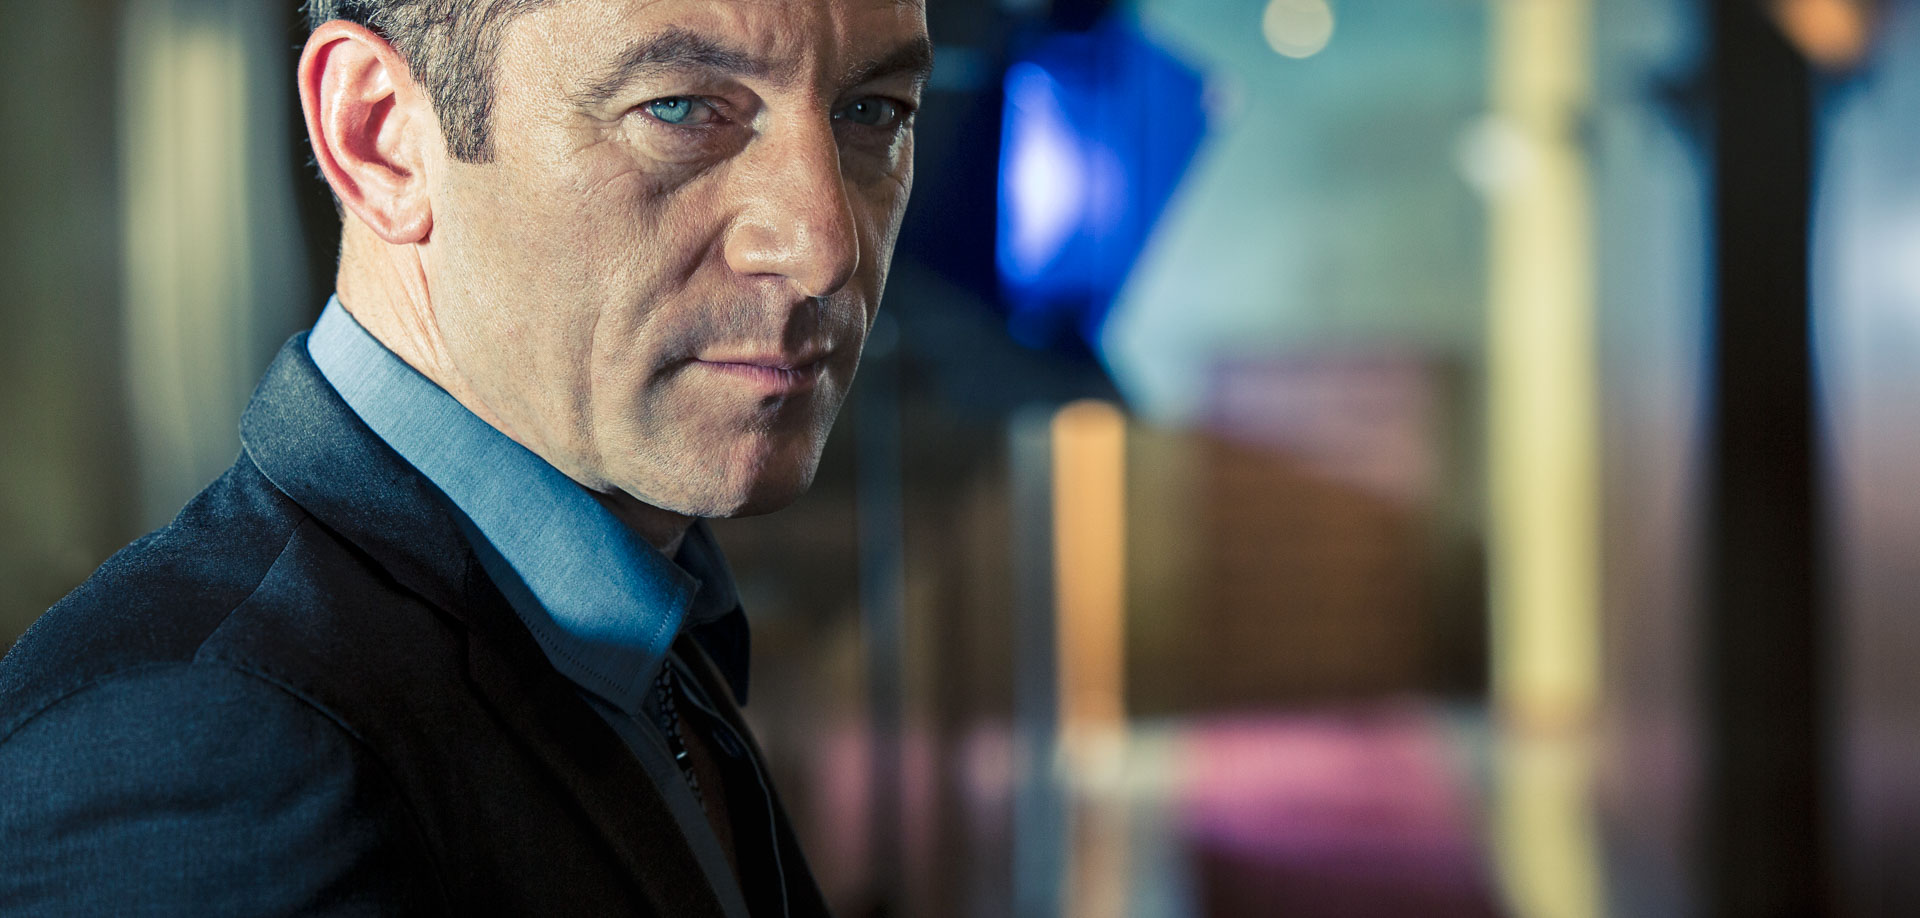 Actor Jason Isaacs, Photographed by James Hickey